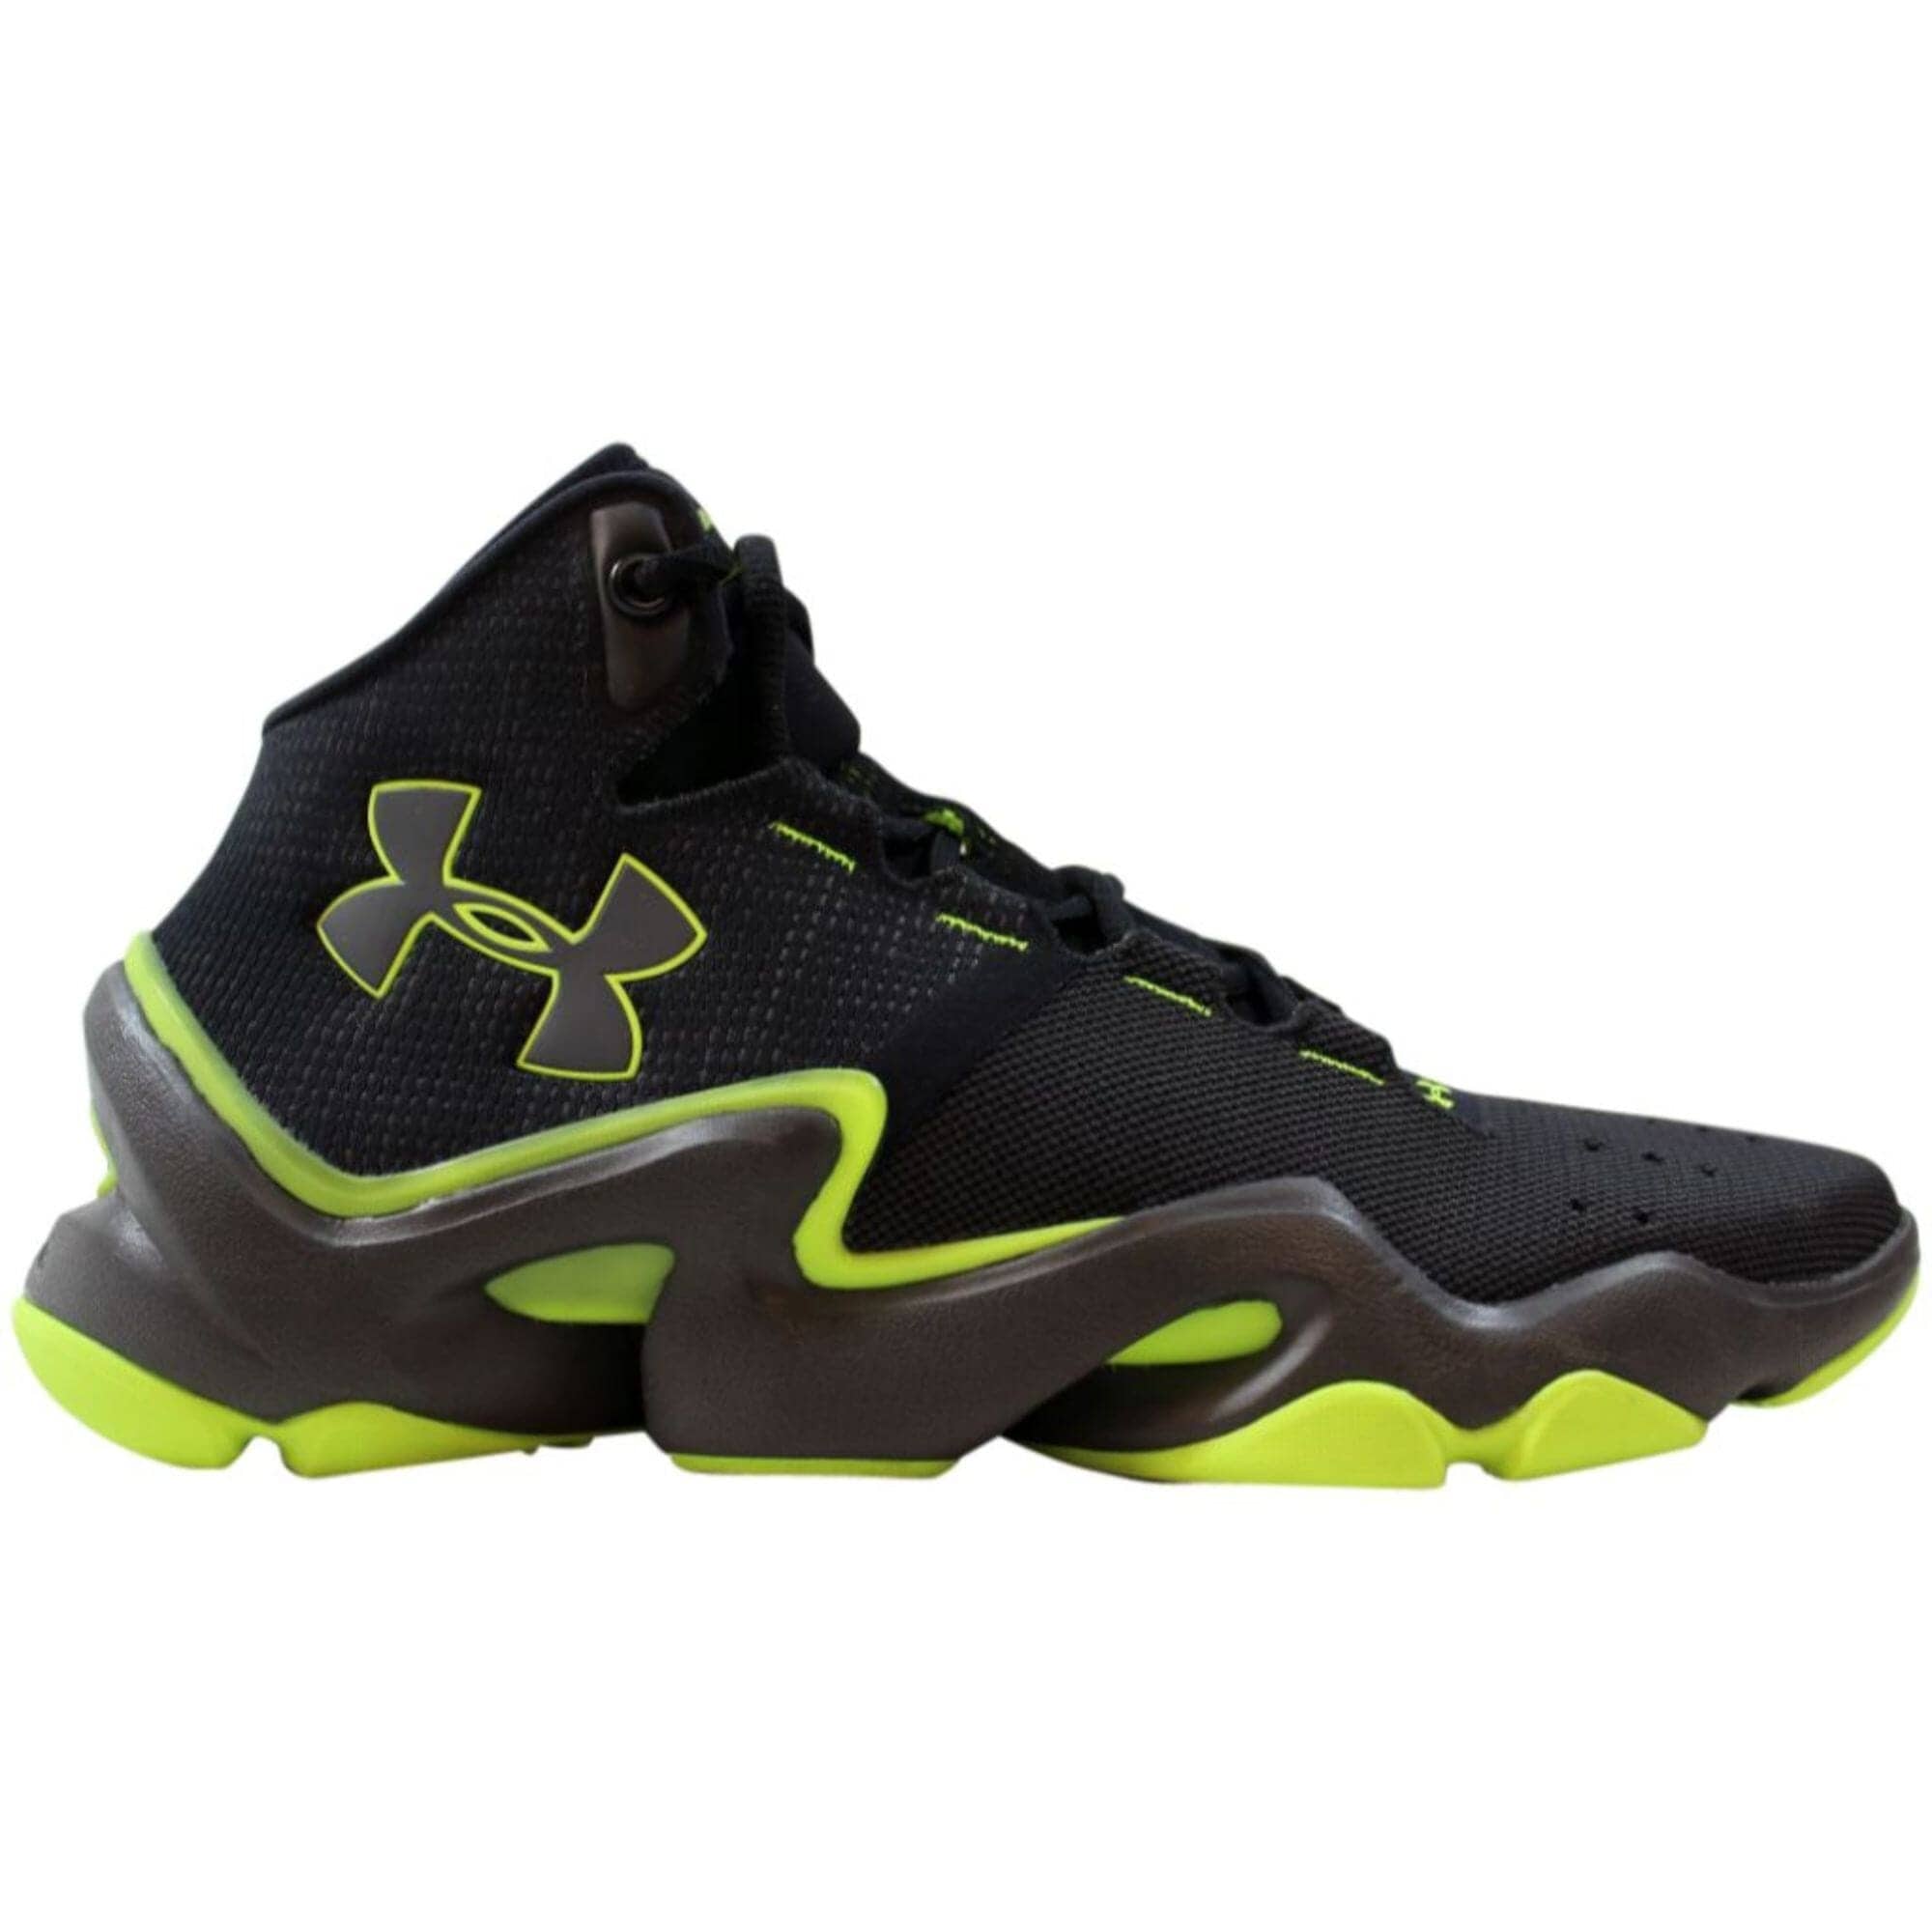 Shop Black Friday Deals on Under Armour 